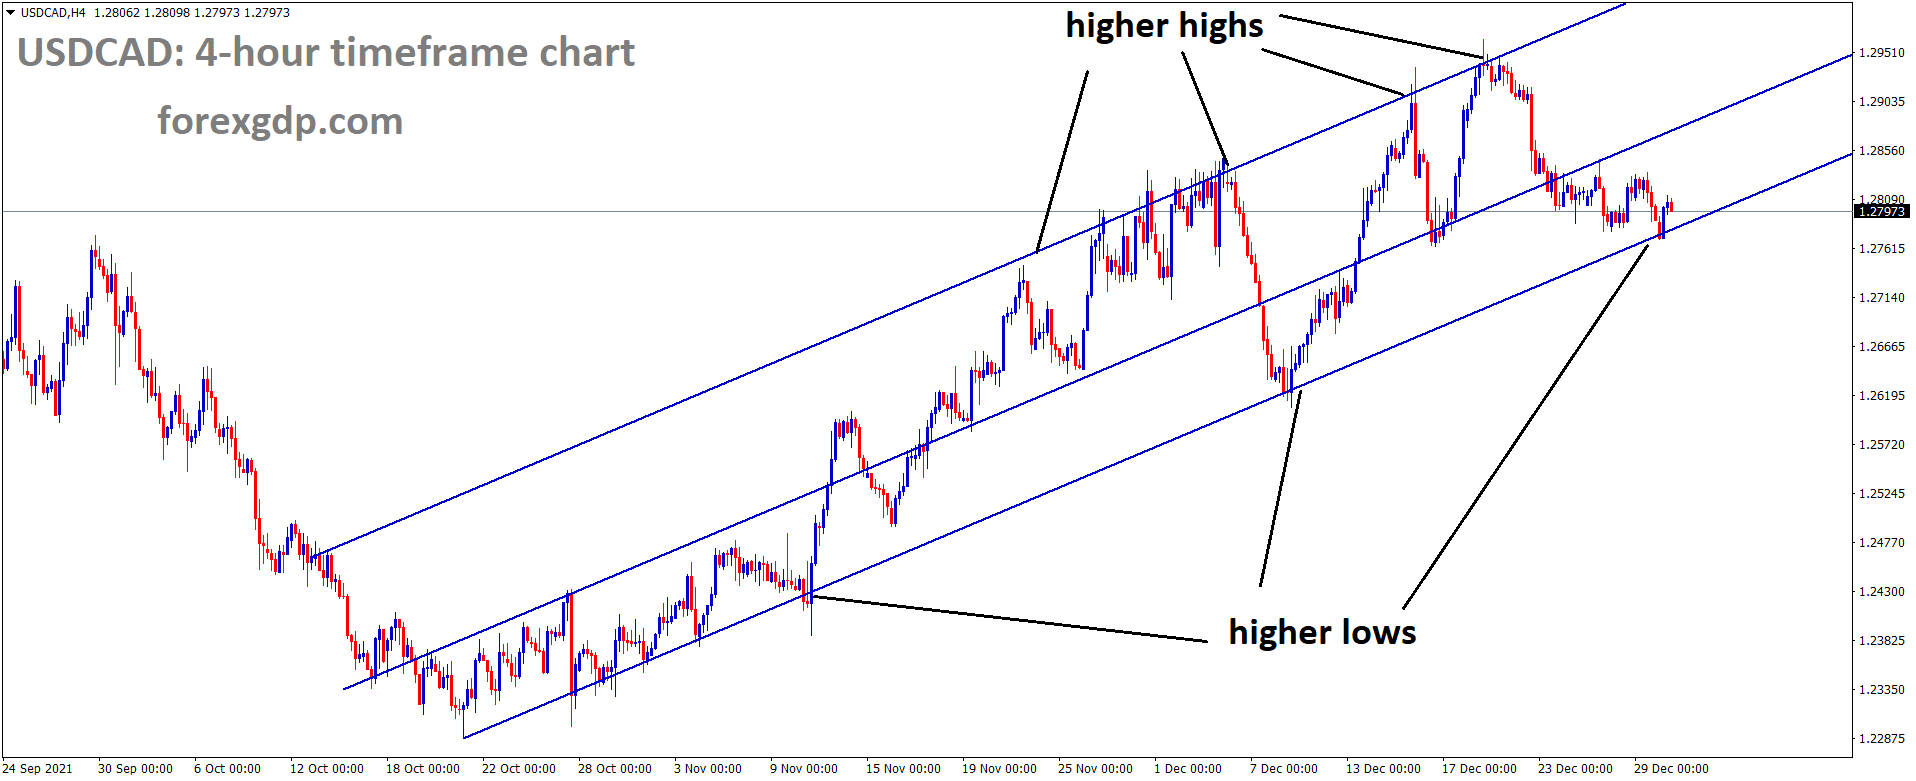 USDCAD is moving in an Ascending channel and the market has reached the higher low area of the Ascending channel 1